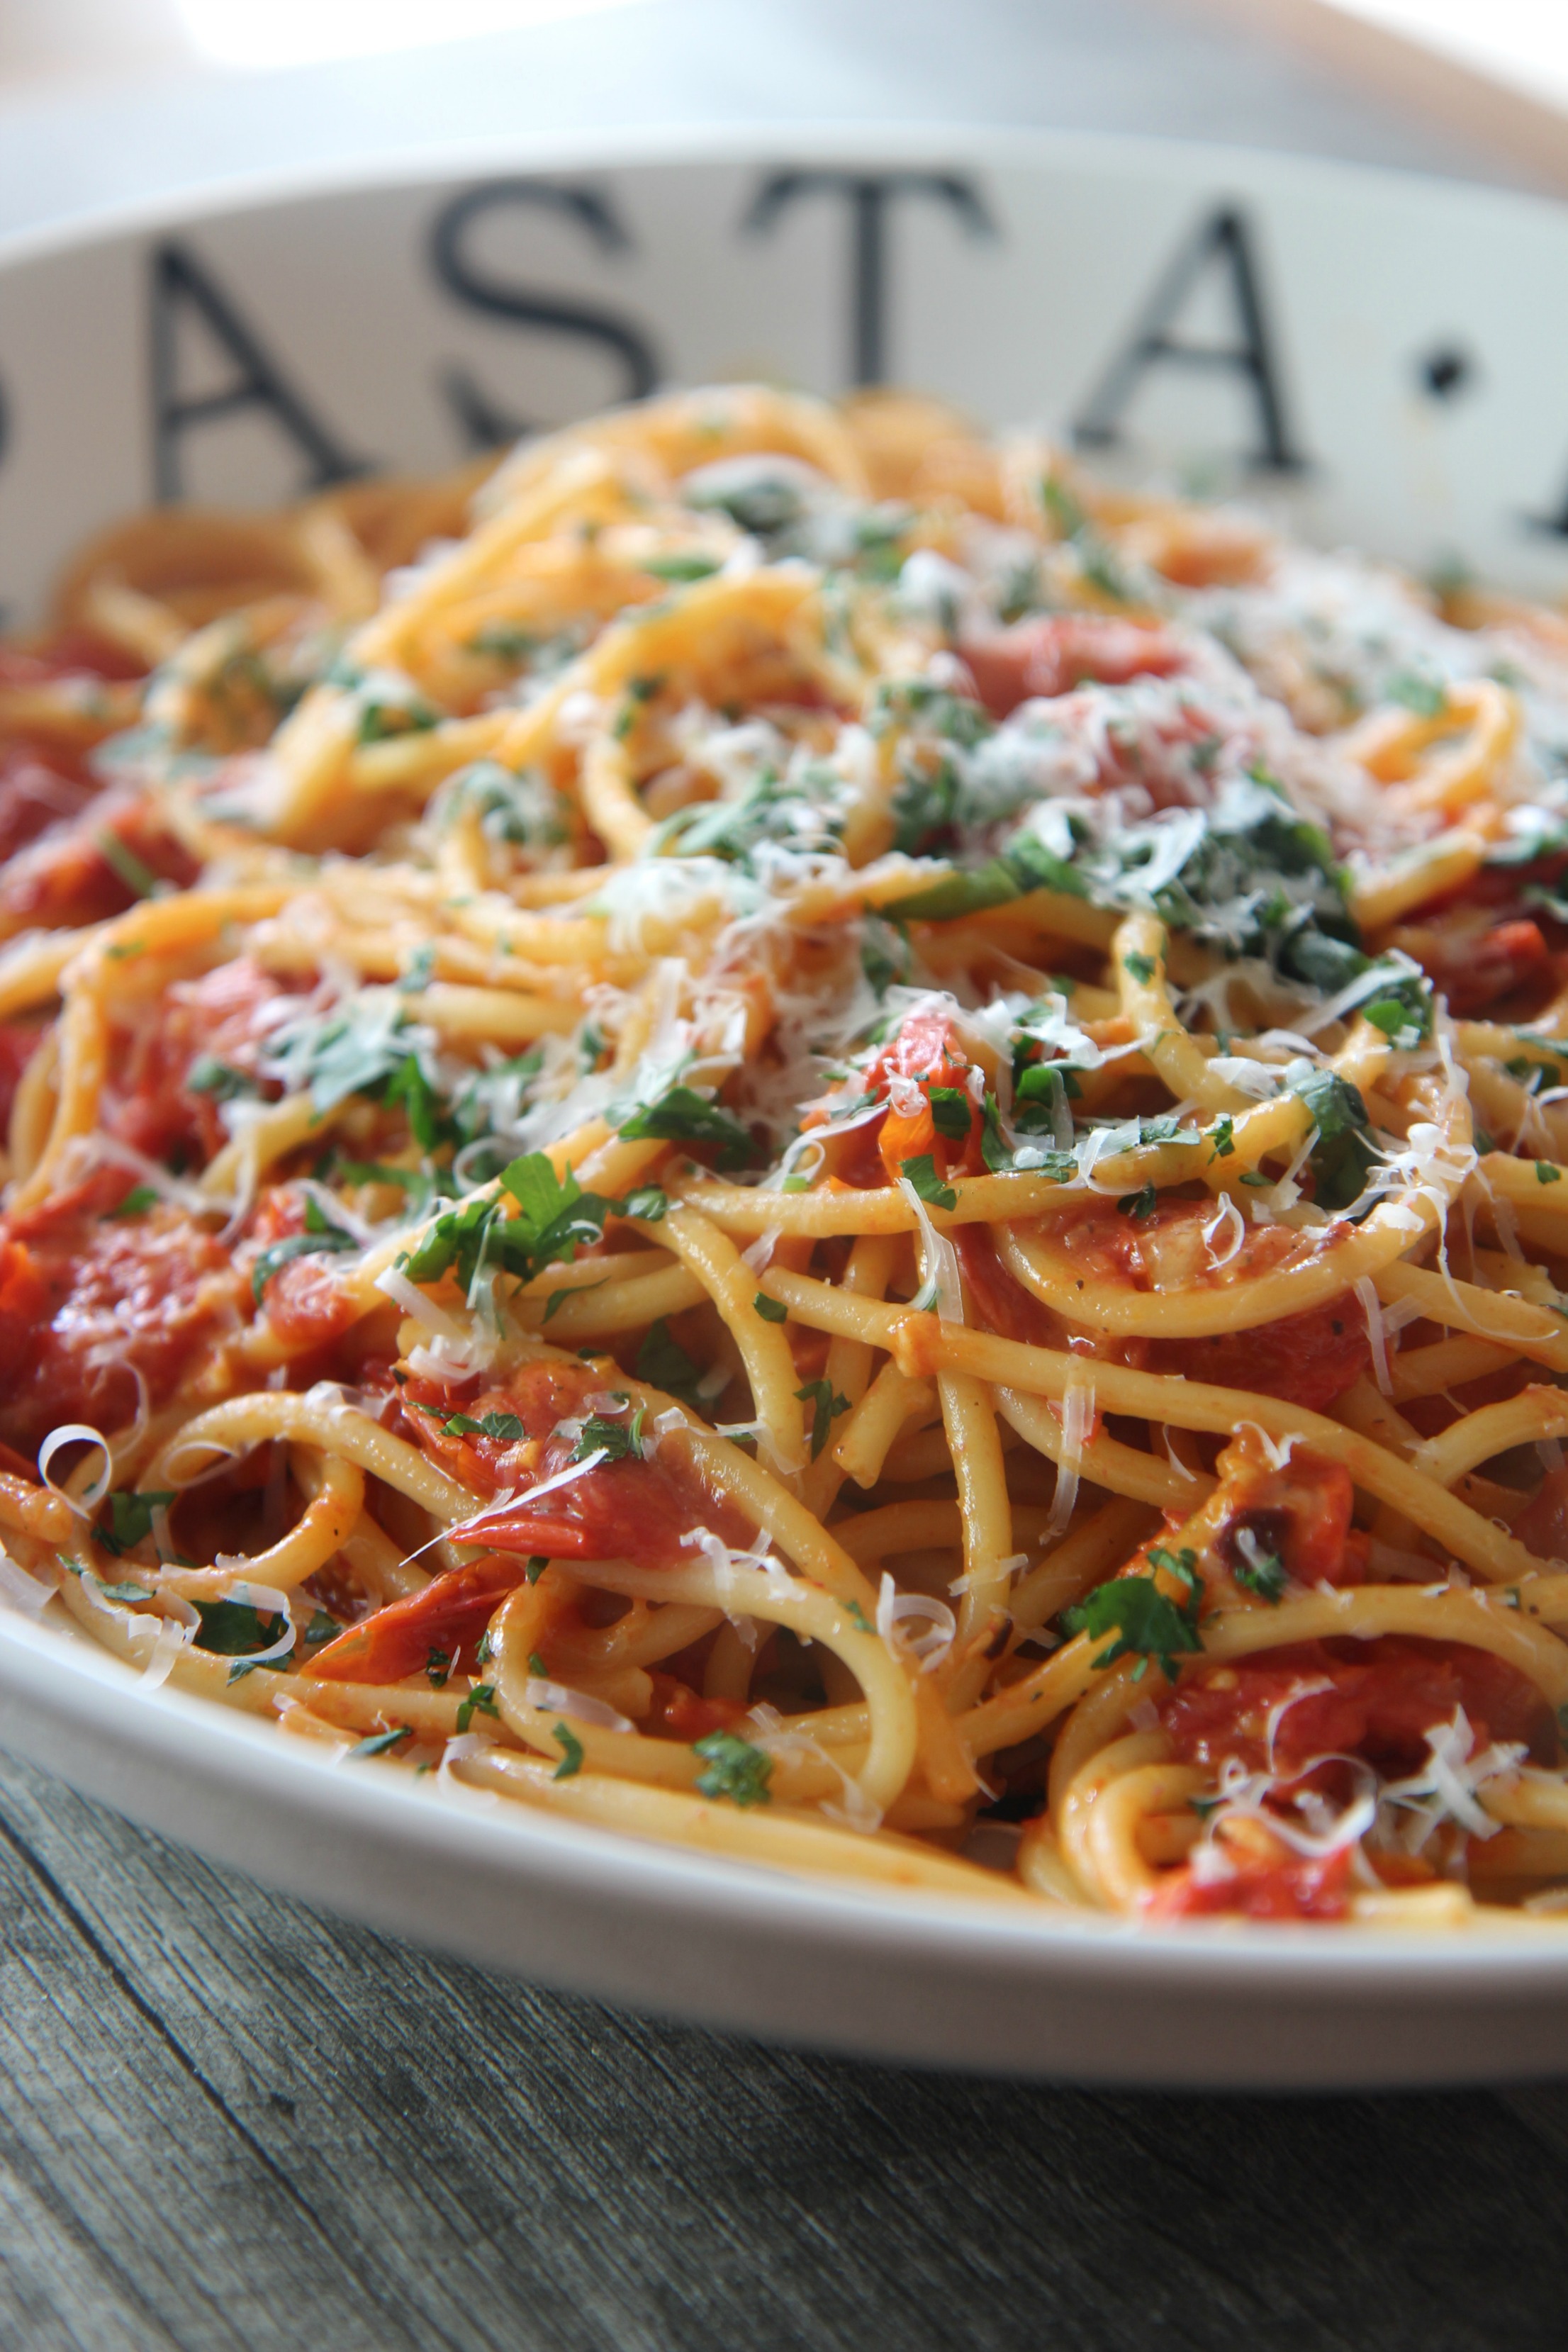 Fresh roasted tomatoes, tender pasta, and a light helping of mozzarella cheese make this a deliciously light pasta dish